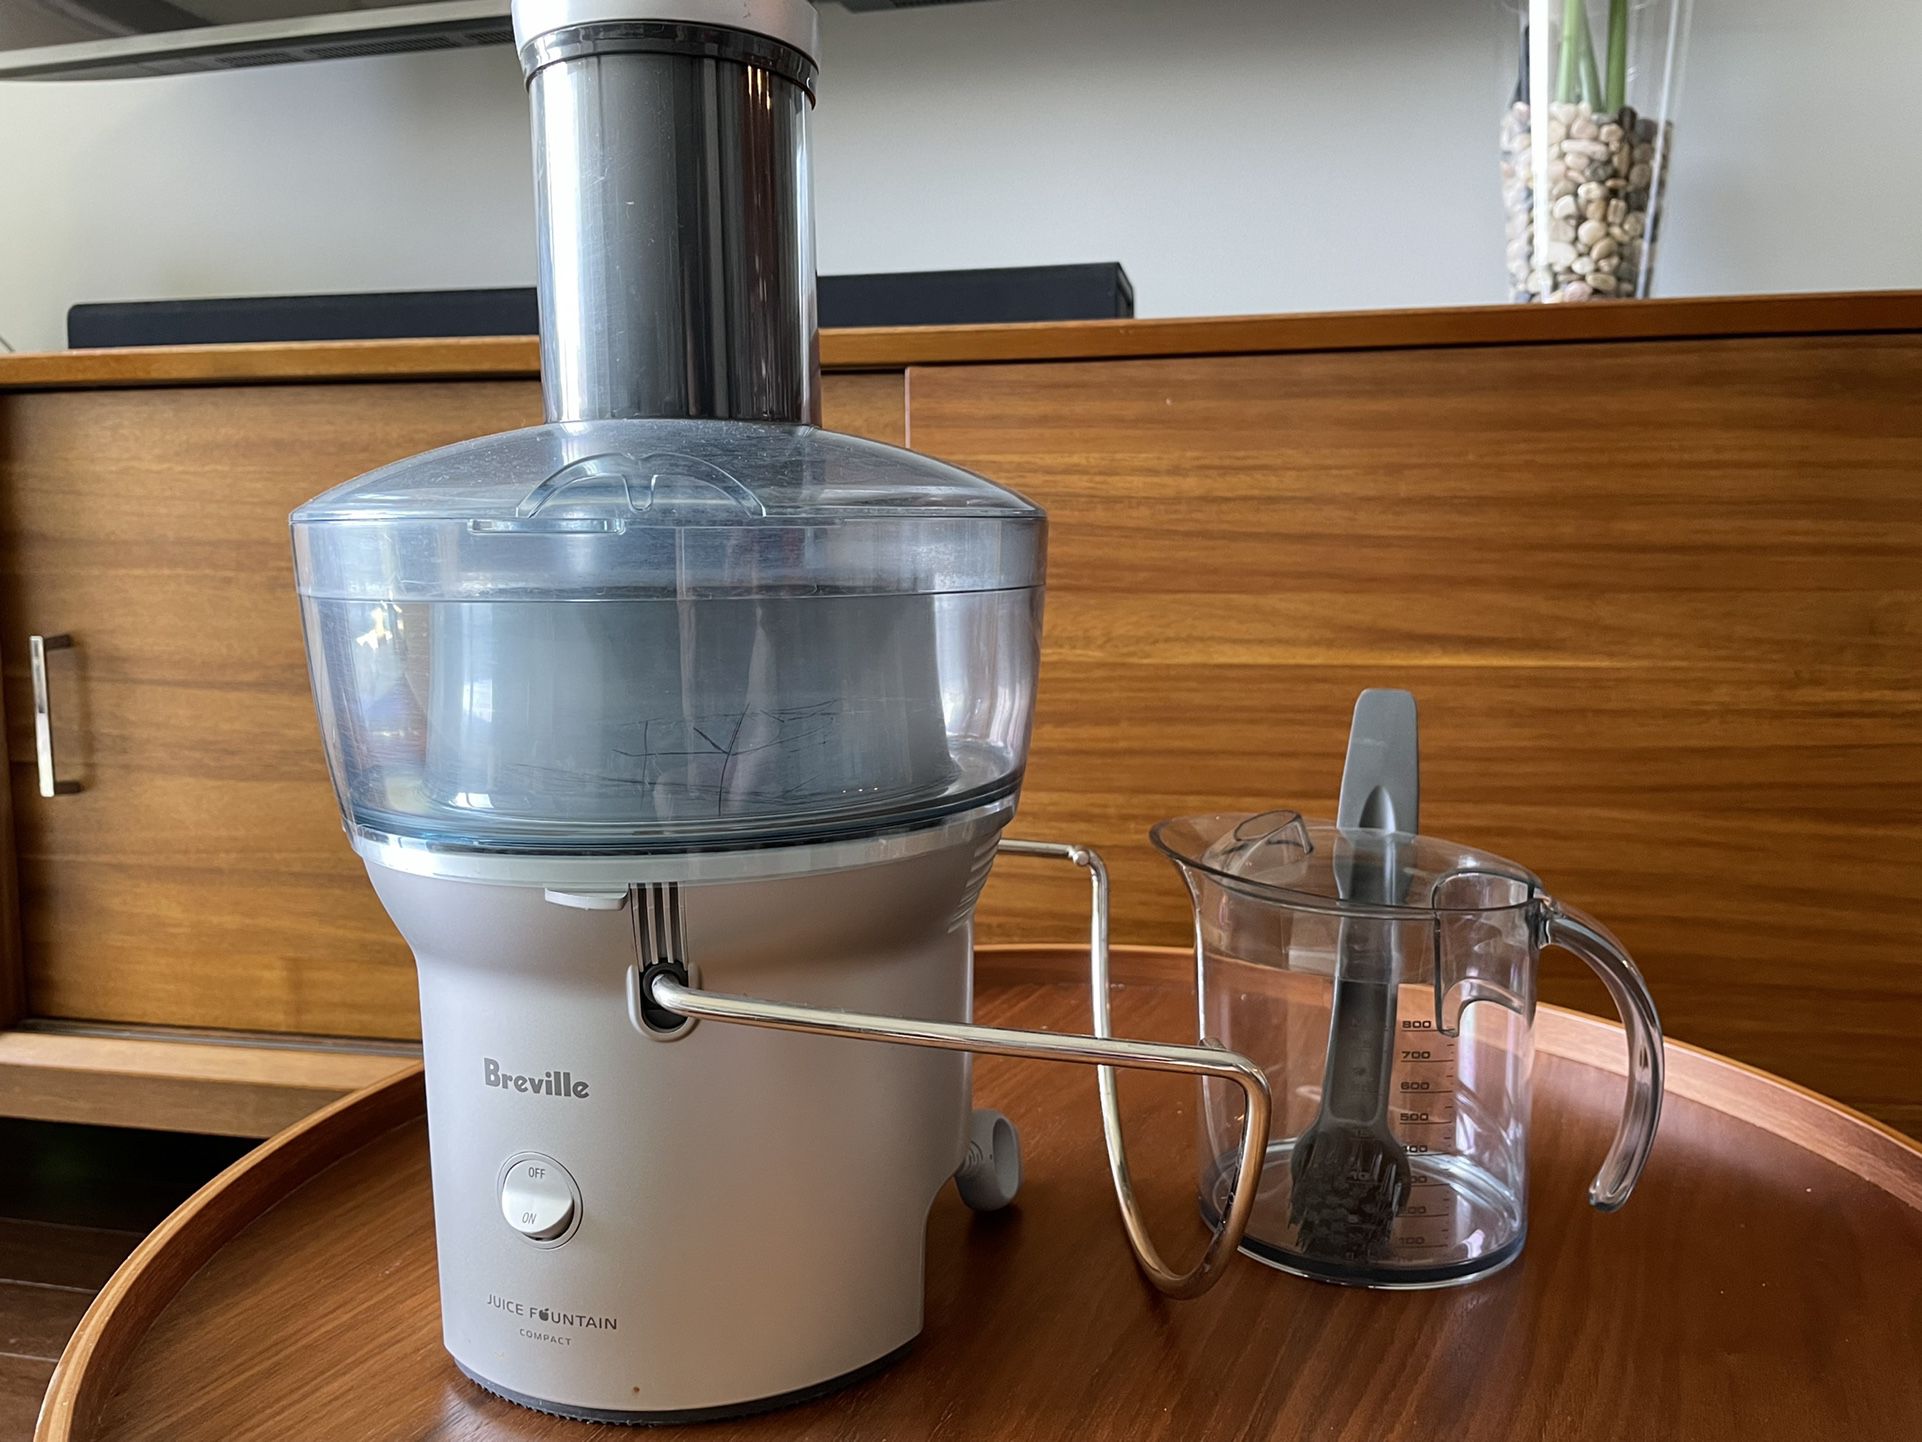 Breville Juicer - Juice Fountain Compact